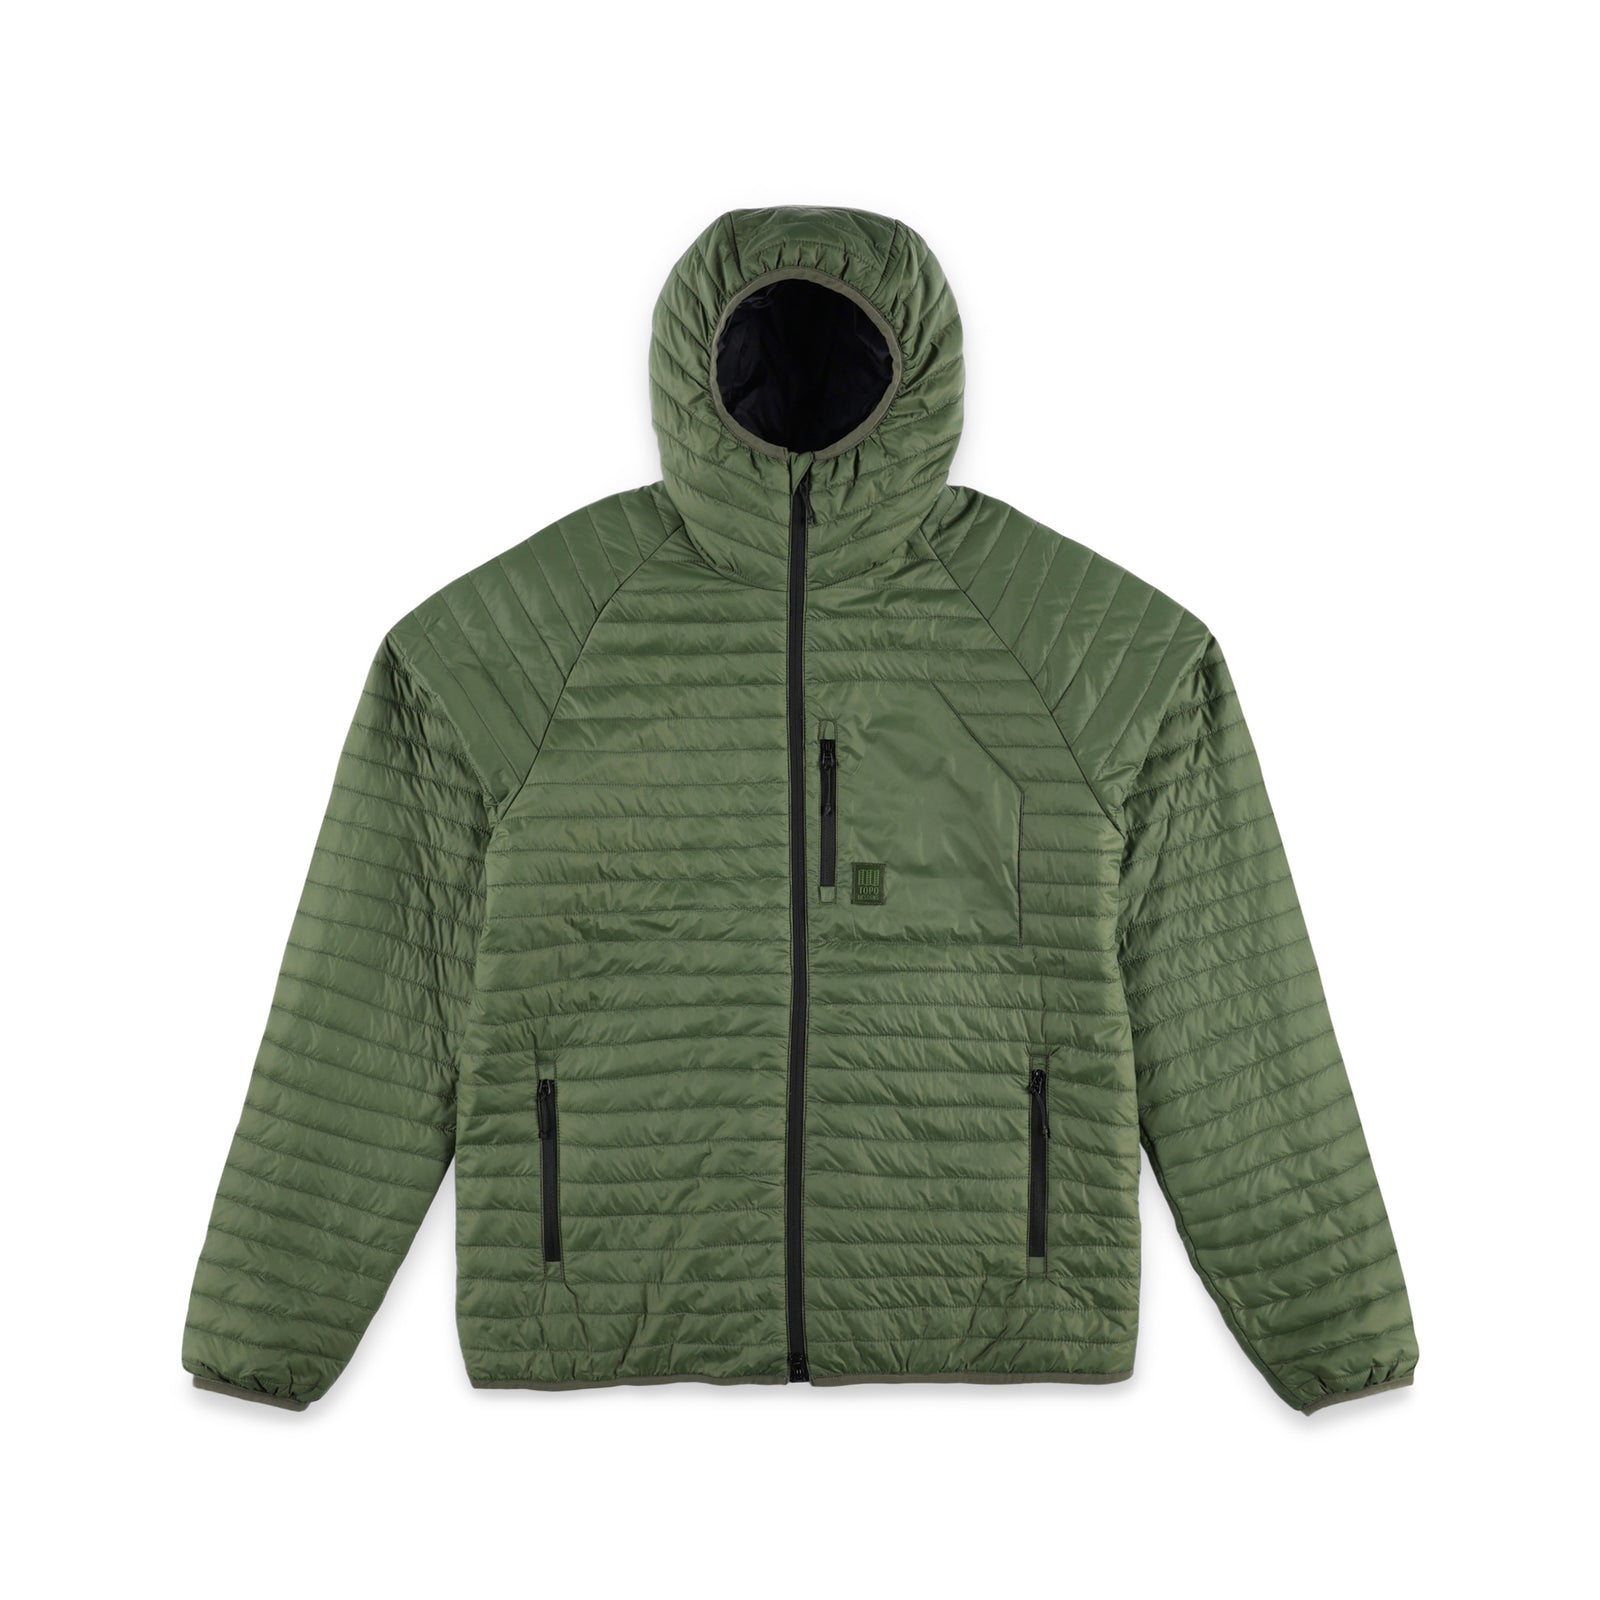 Topo Designs Men's Global Puffer packable recycled insulated Hoodie jacket in "olive" green.